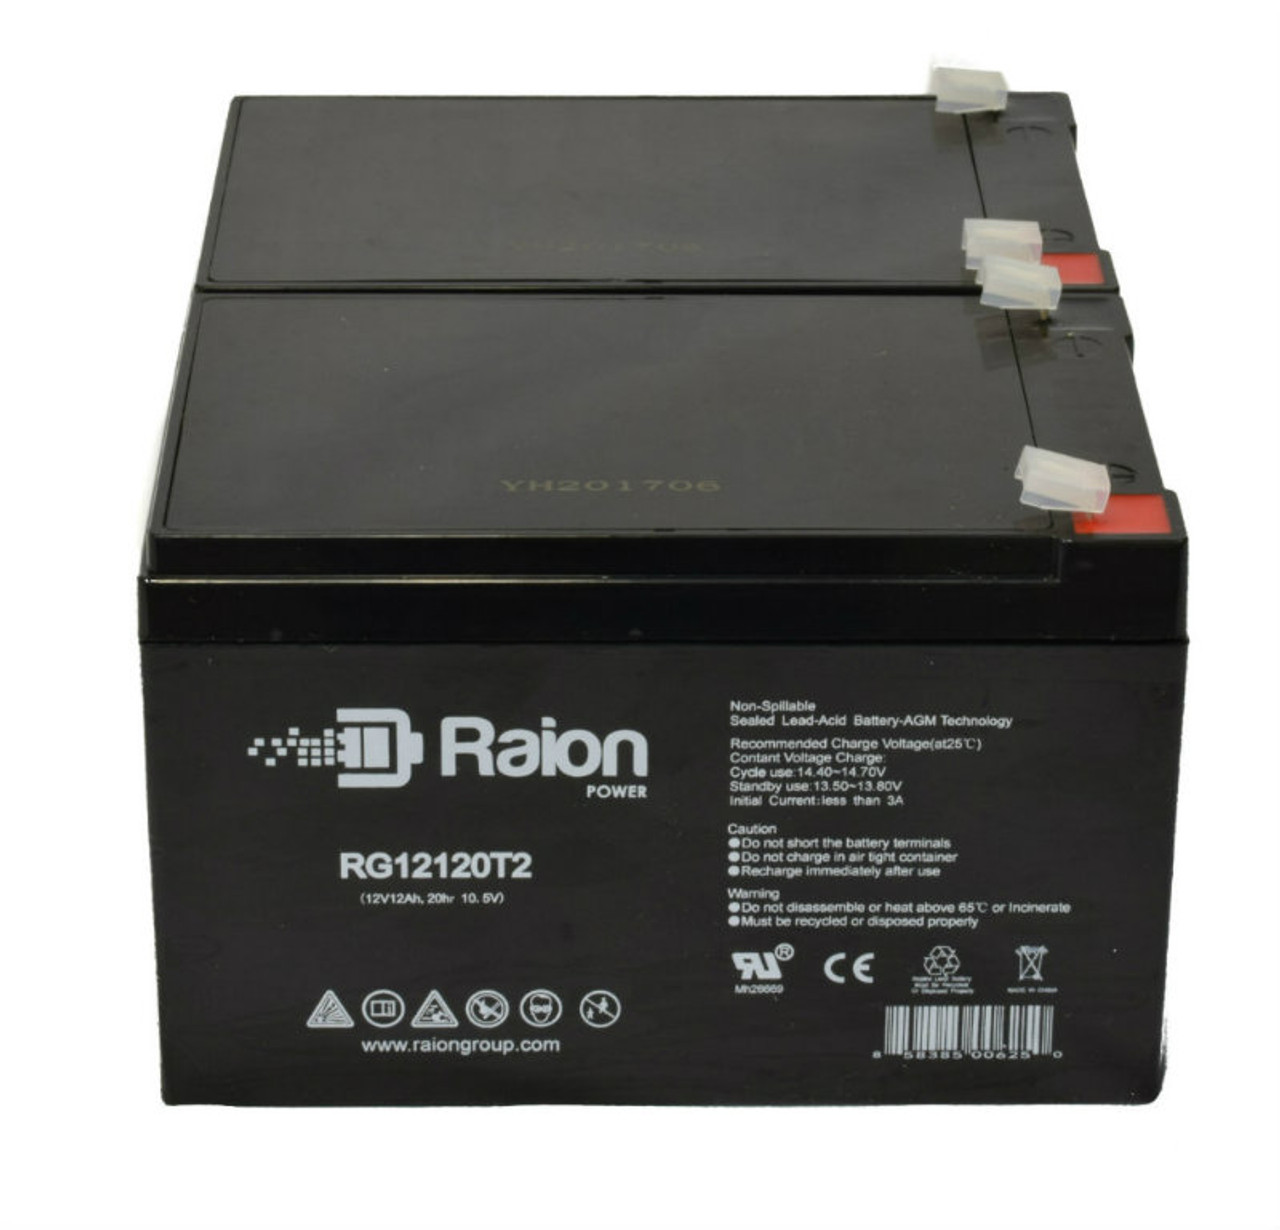 Raion Power RG12120T2 Replacement Battery Set for Merits Health Products Pioneer 5 S534 Mobility Scooter - 2 Pack